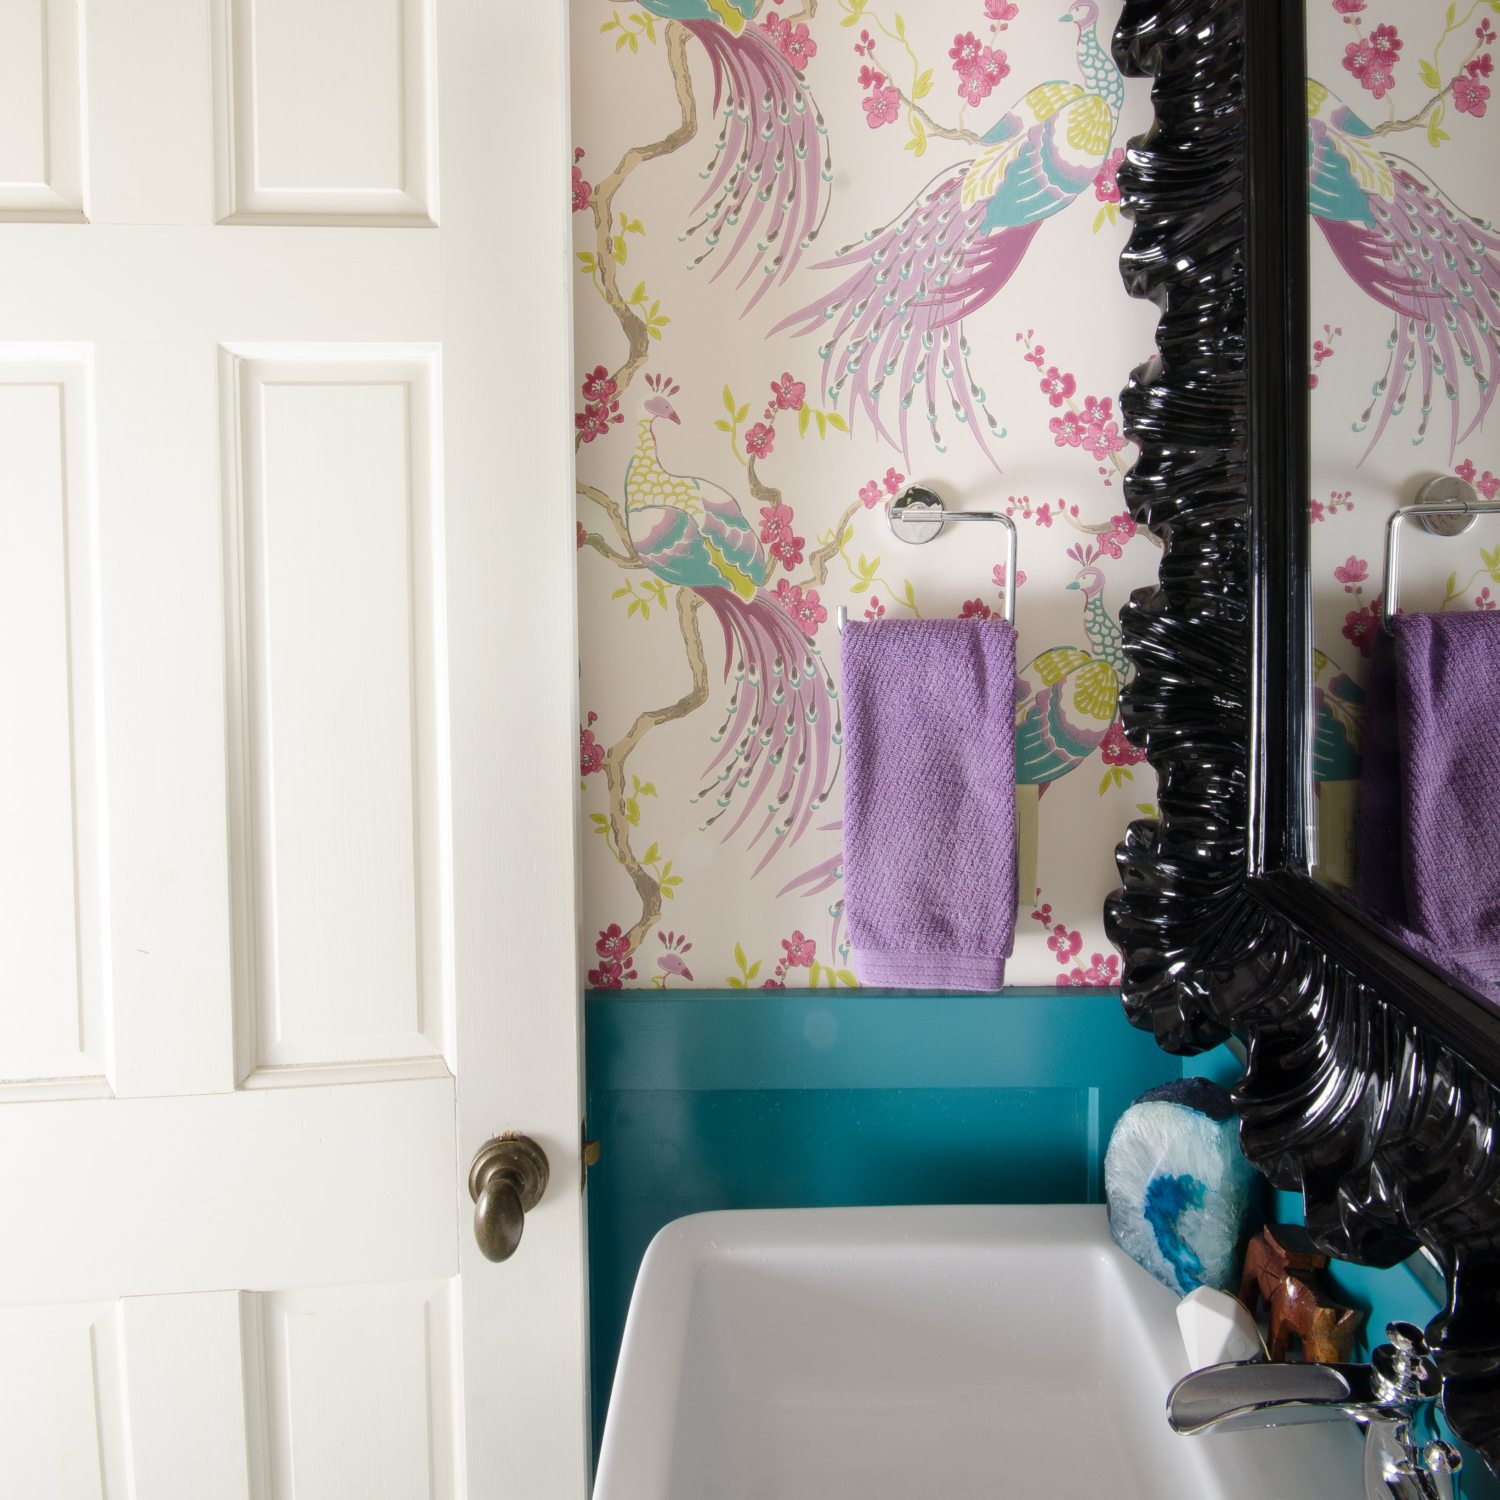 Small powder room with amazing bird wallpaper and teal blue wainscoting